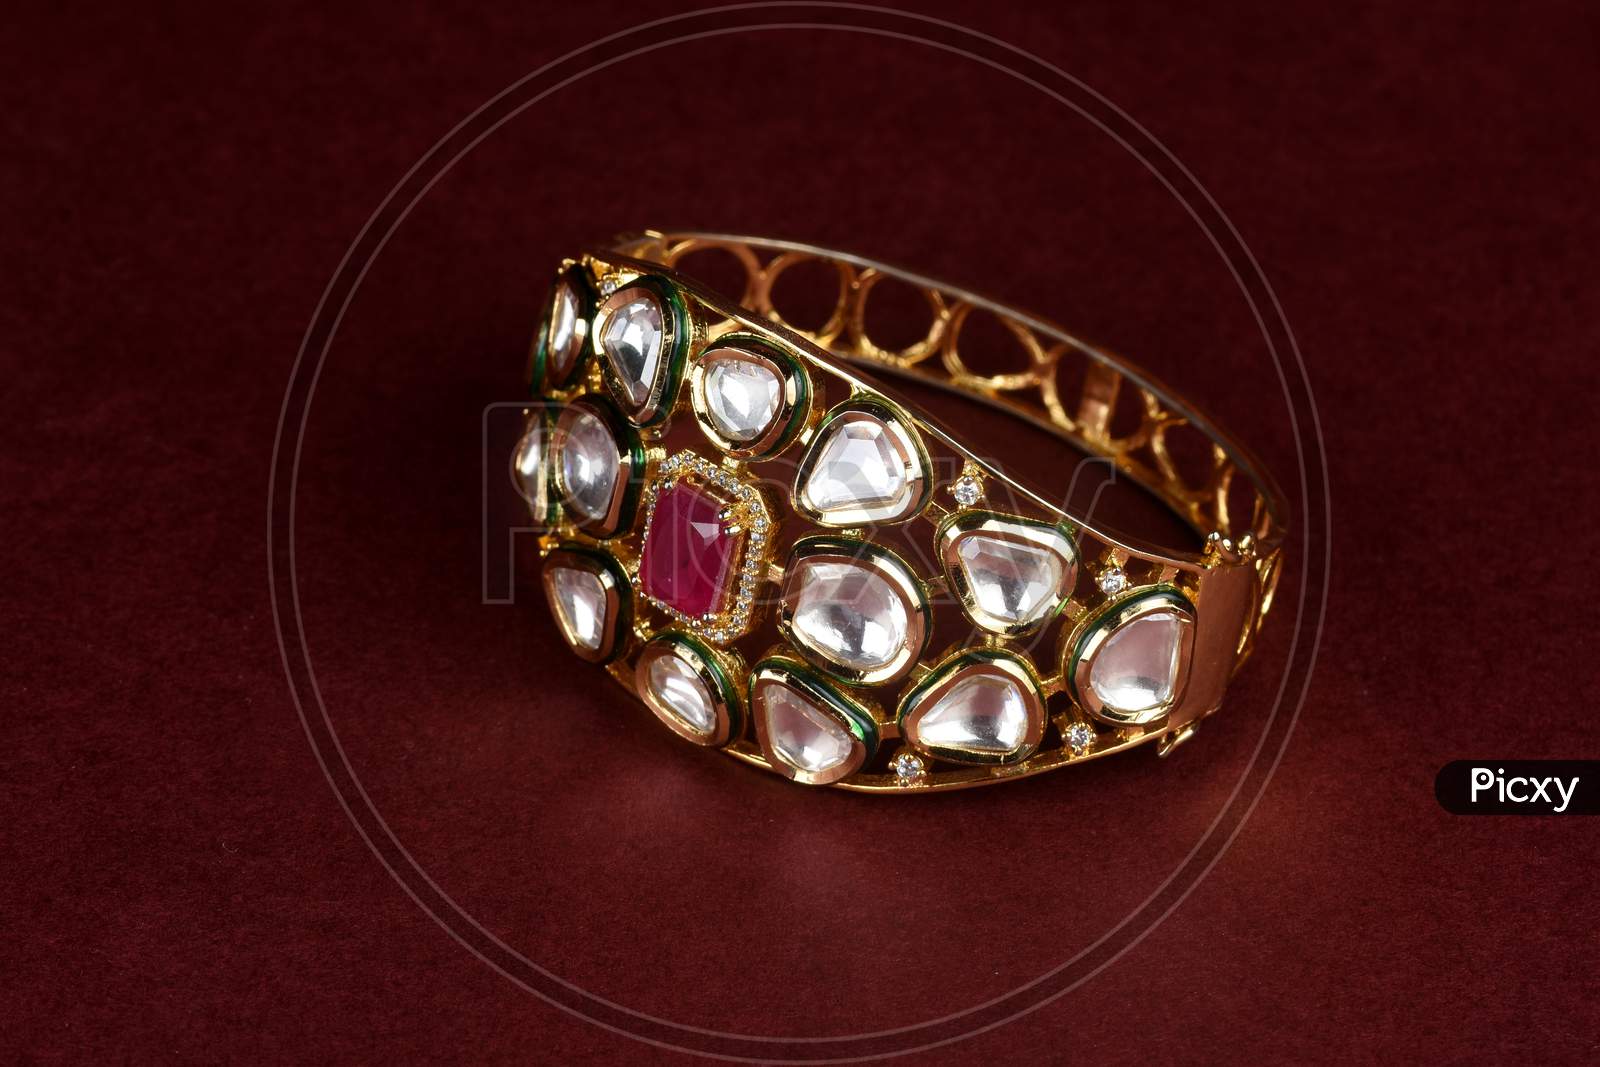 Gold Bracelet On Red Background,Kundan Bracelet,Style, Fashion And Design Of Jewelry. Indian Traditional Jewellery,Indian Wedding Jewellery